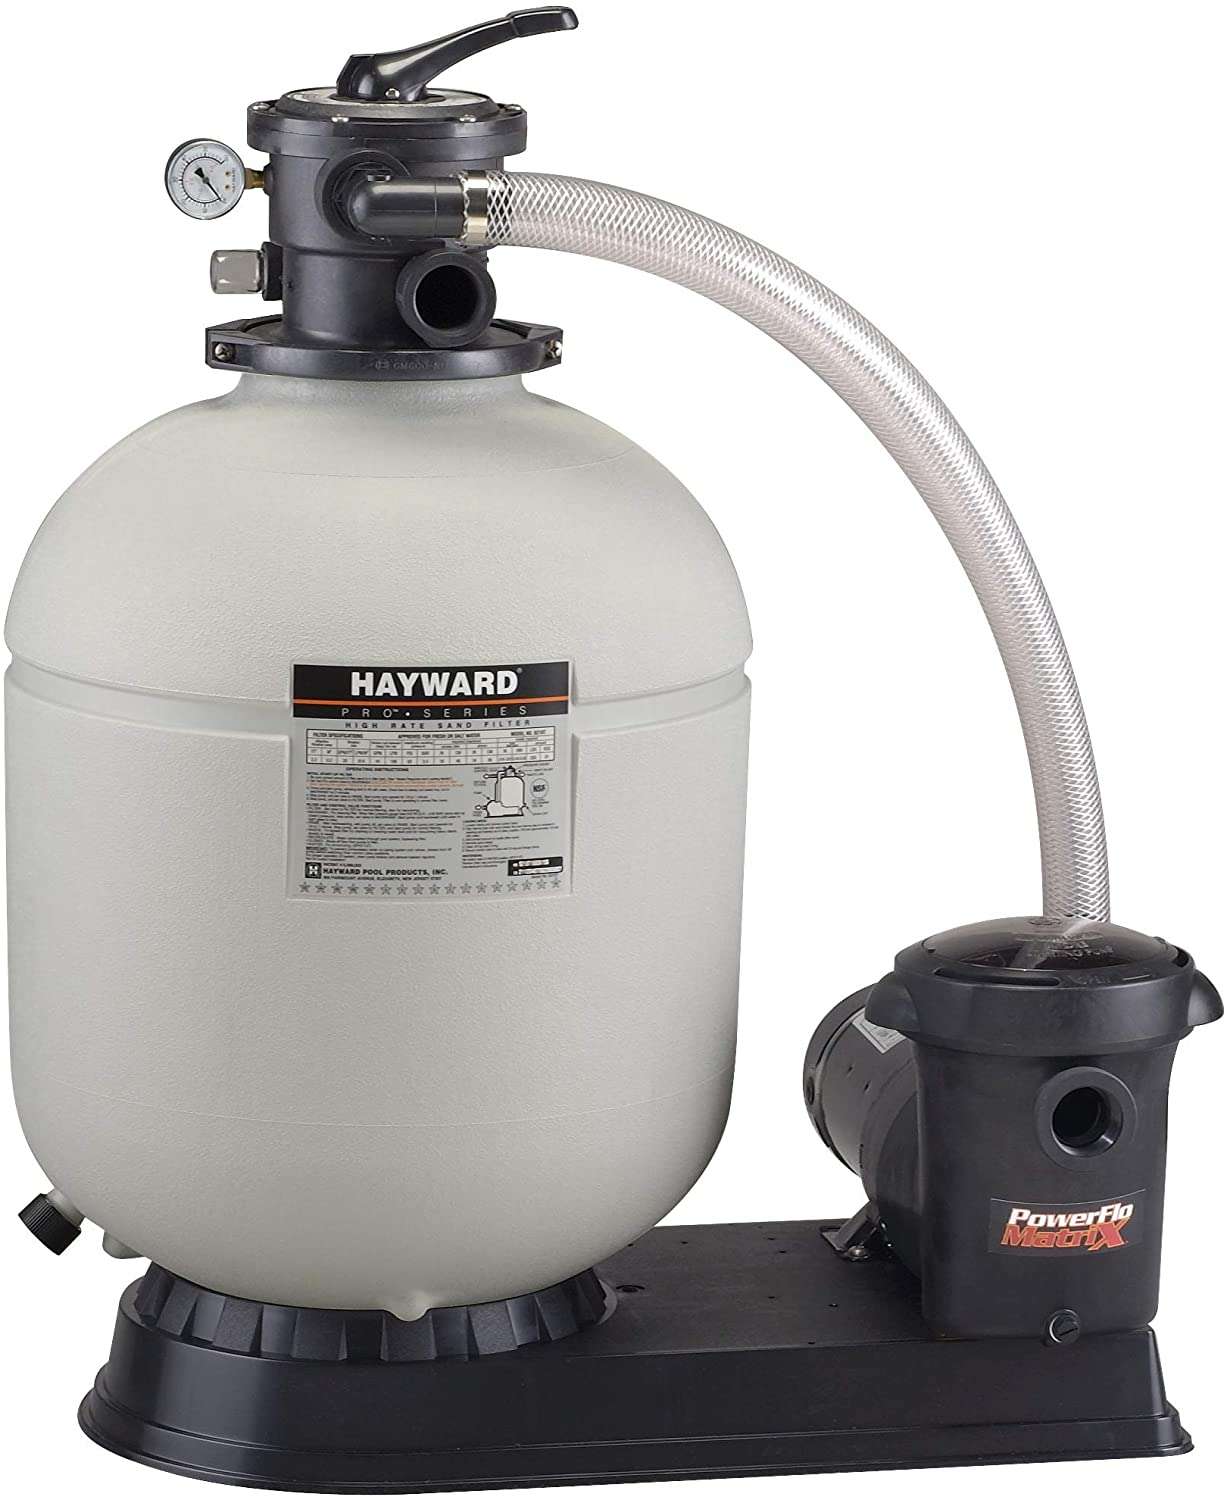 Top 7 Above Ground Pool Sand Filters You Should Consider ...